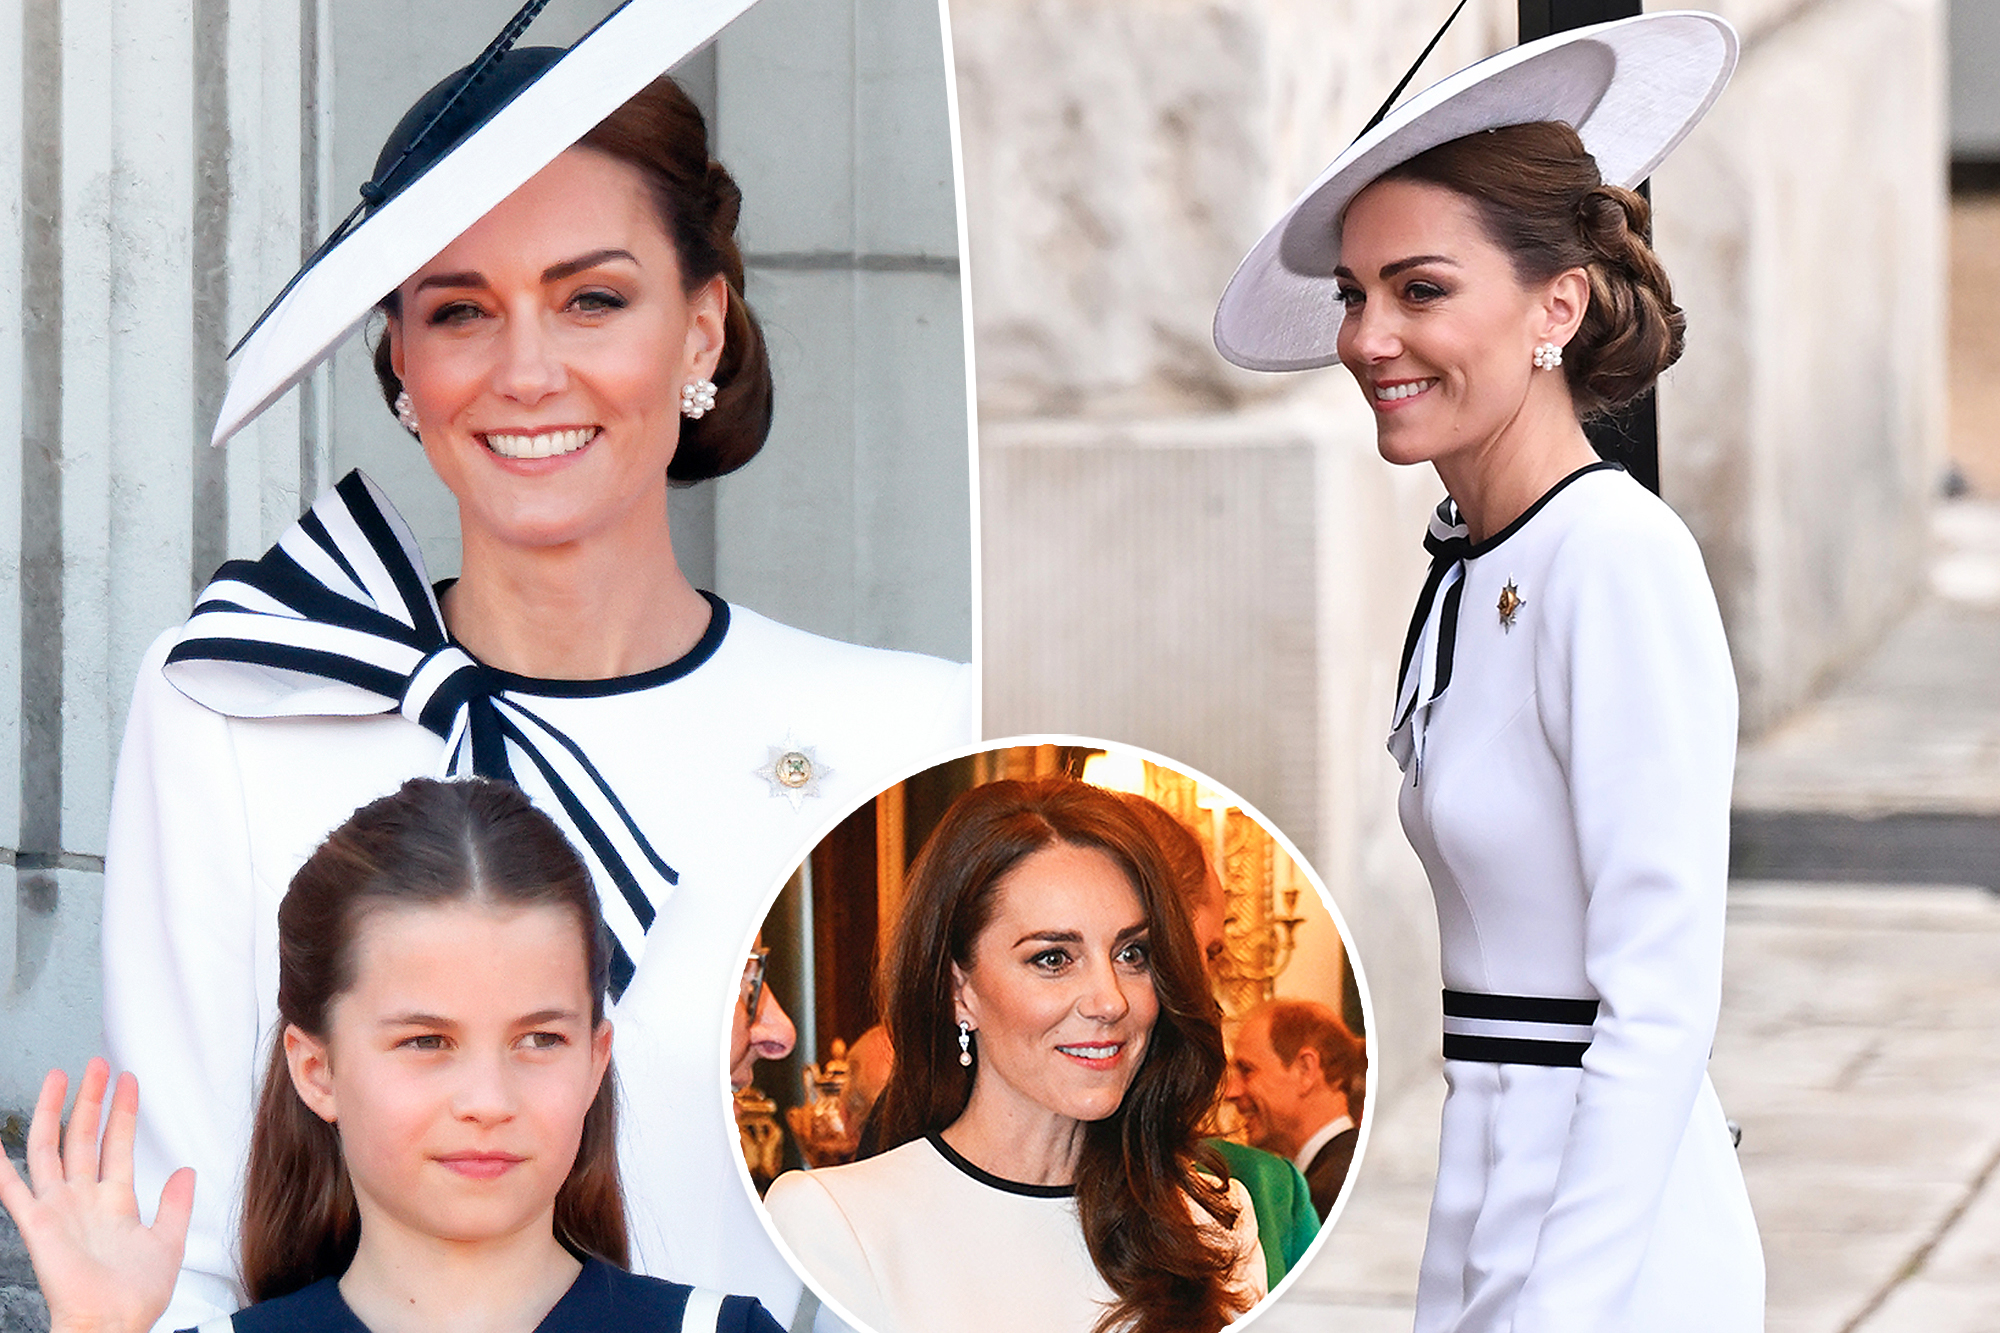 Kate Middleton's Trooping the Colour Outfit: The Hidden Messages Behind Her Fashion Choice